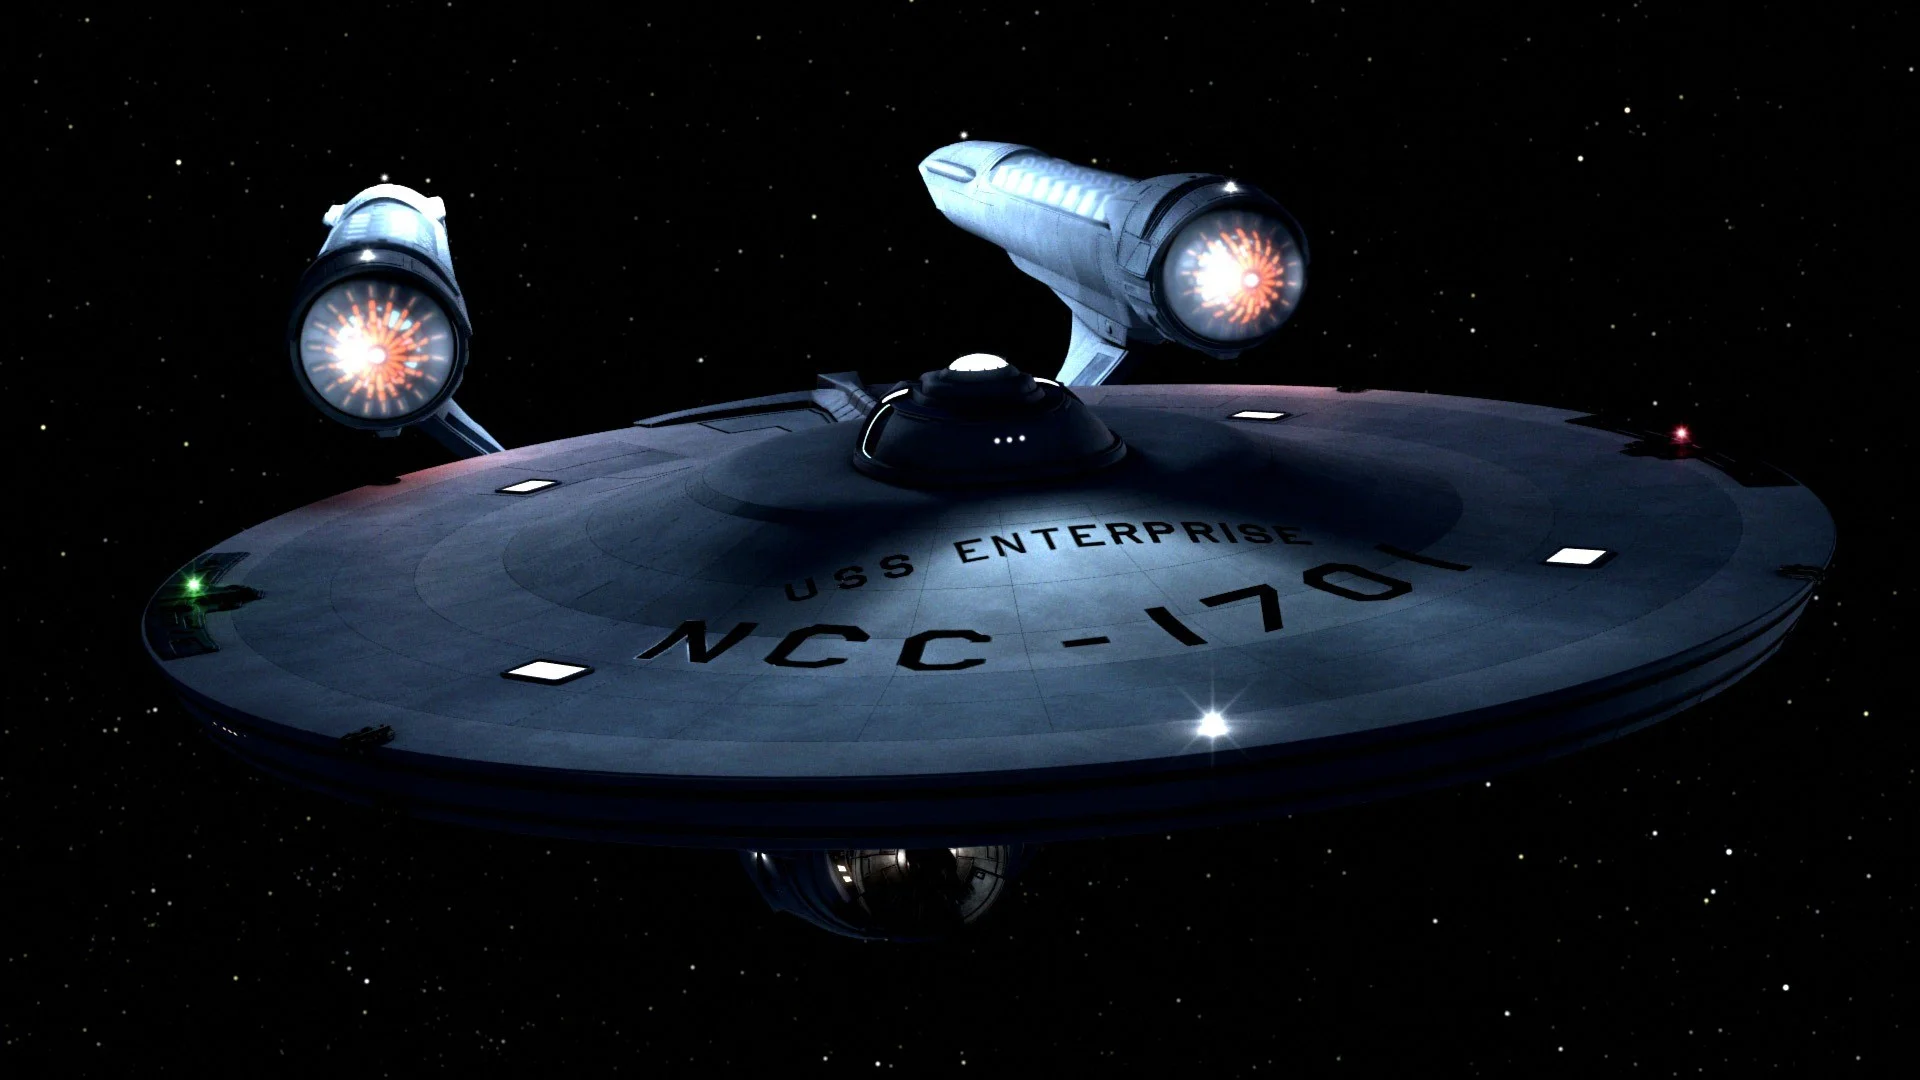 Just a nice image of the TOS Enterprise done in CGI (I think).